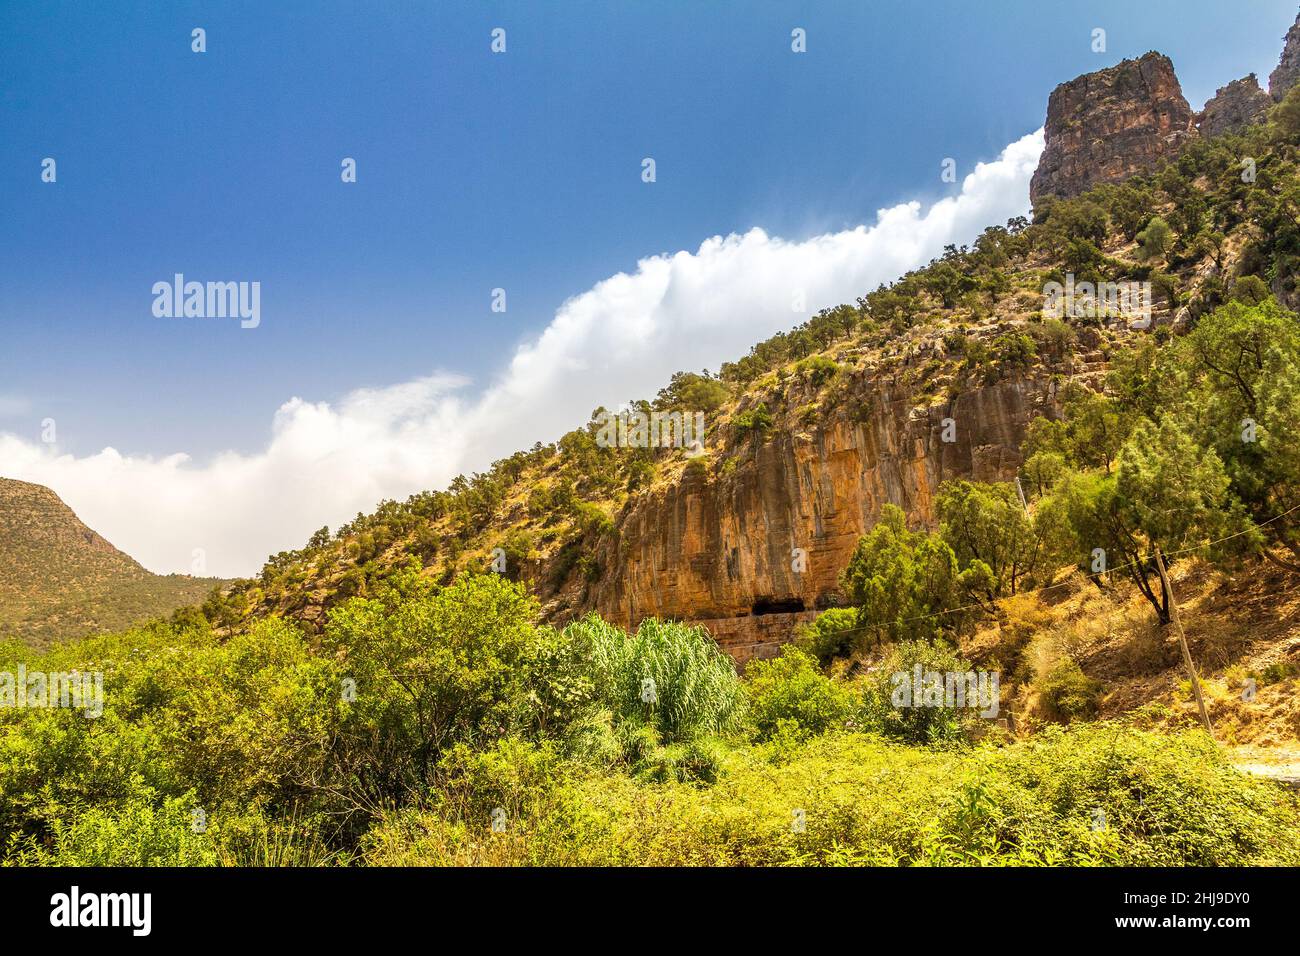 Landscape of the Beni Snassen Mountains in northeast Morocco, Africa. Stock Photo